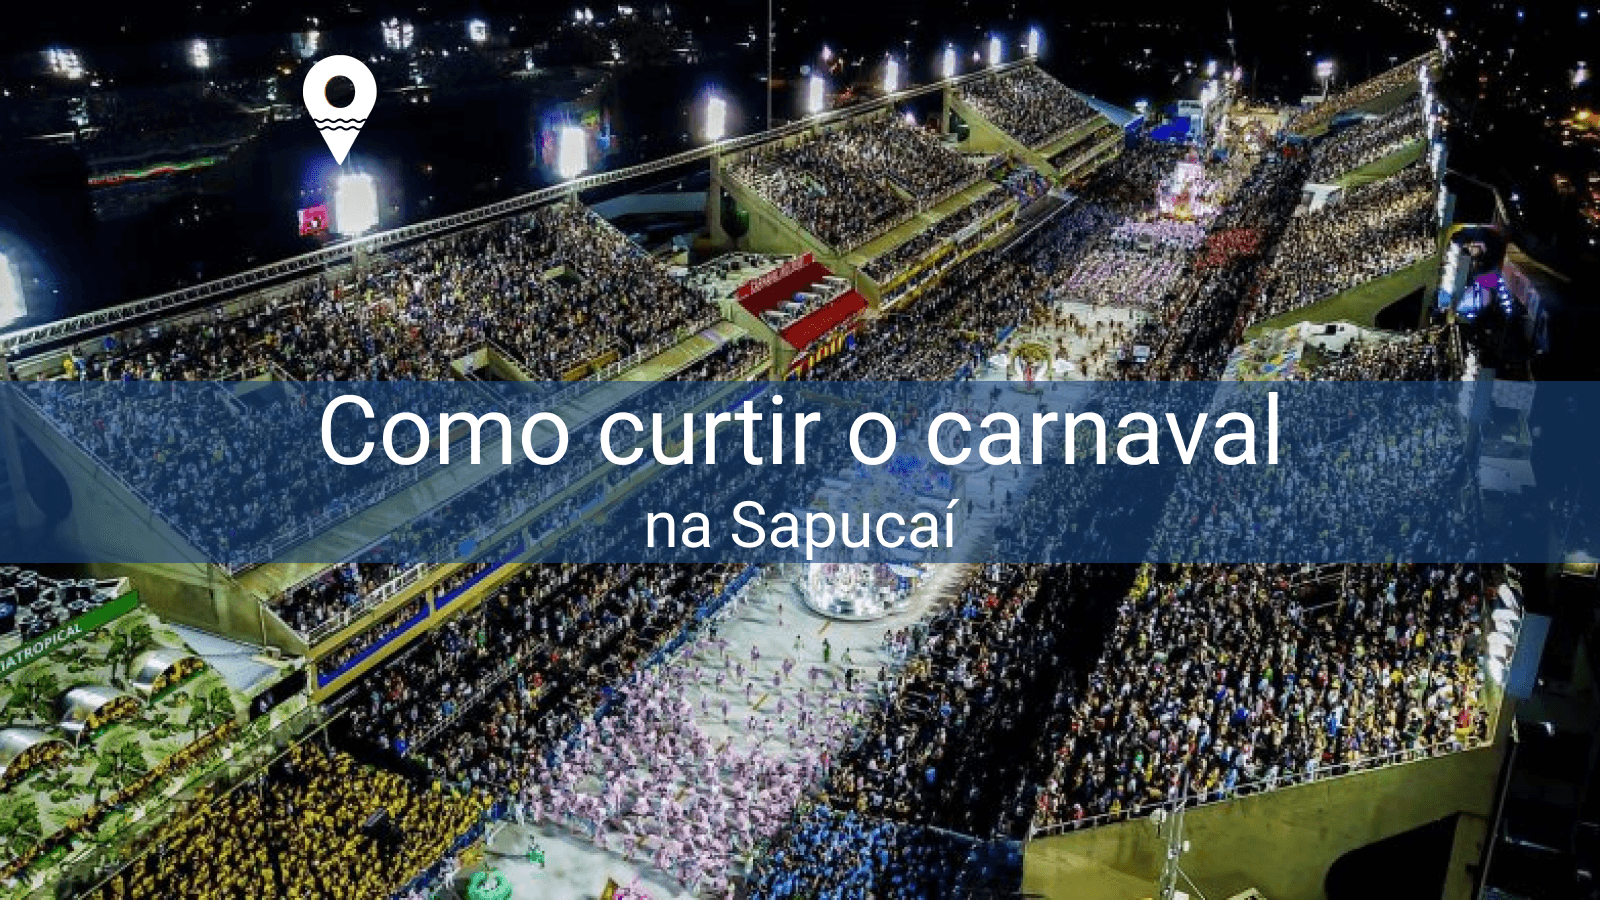 How to enjoy Carnival in Sapucaí?